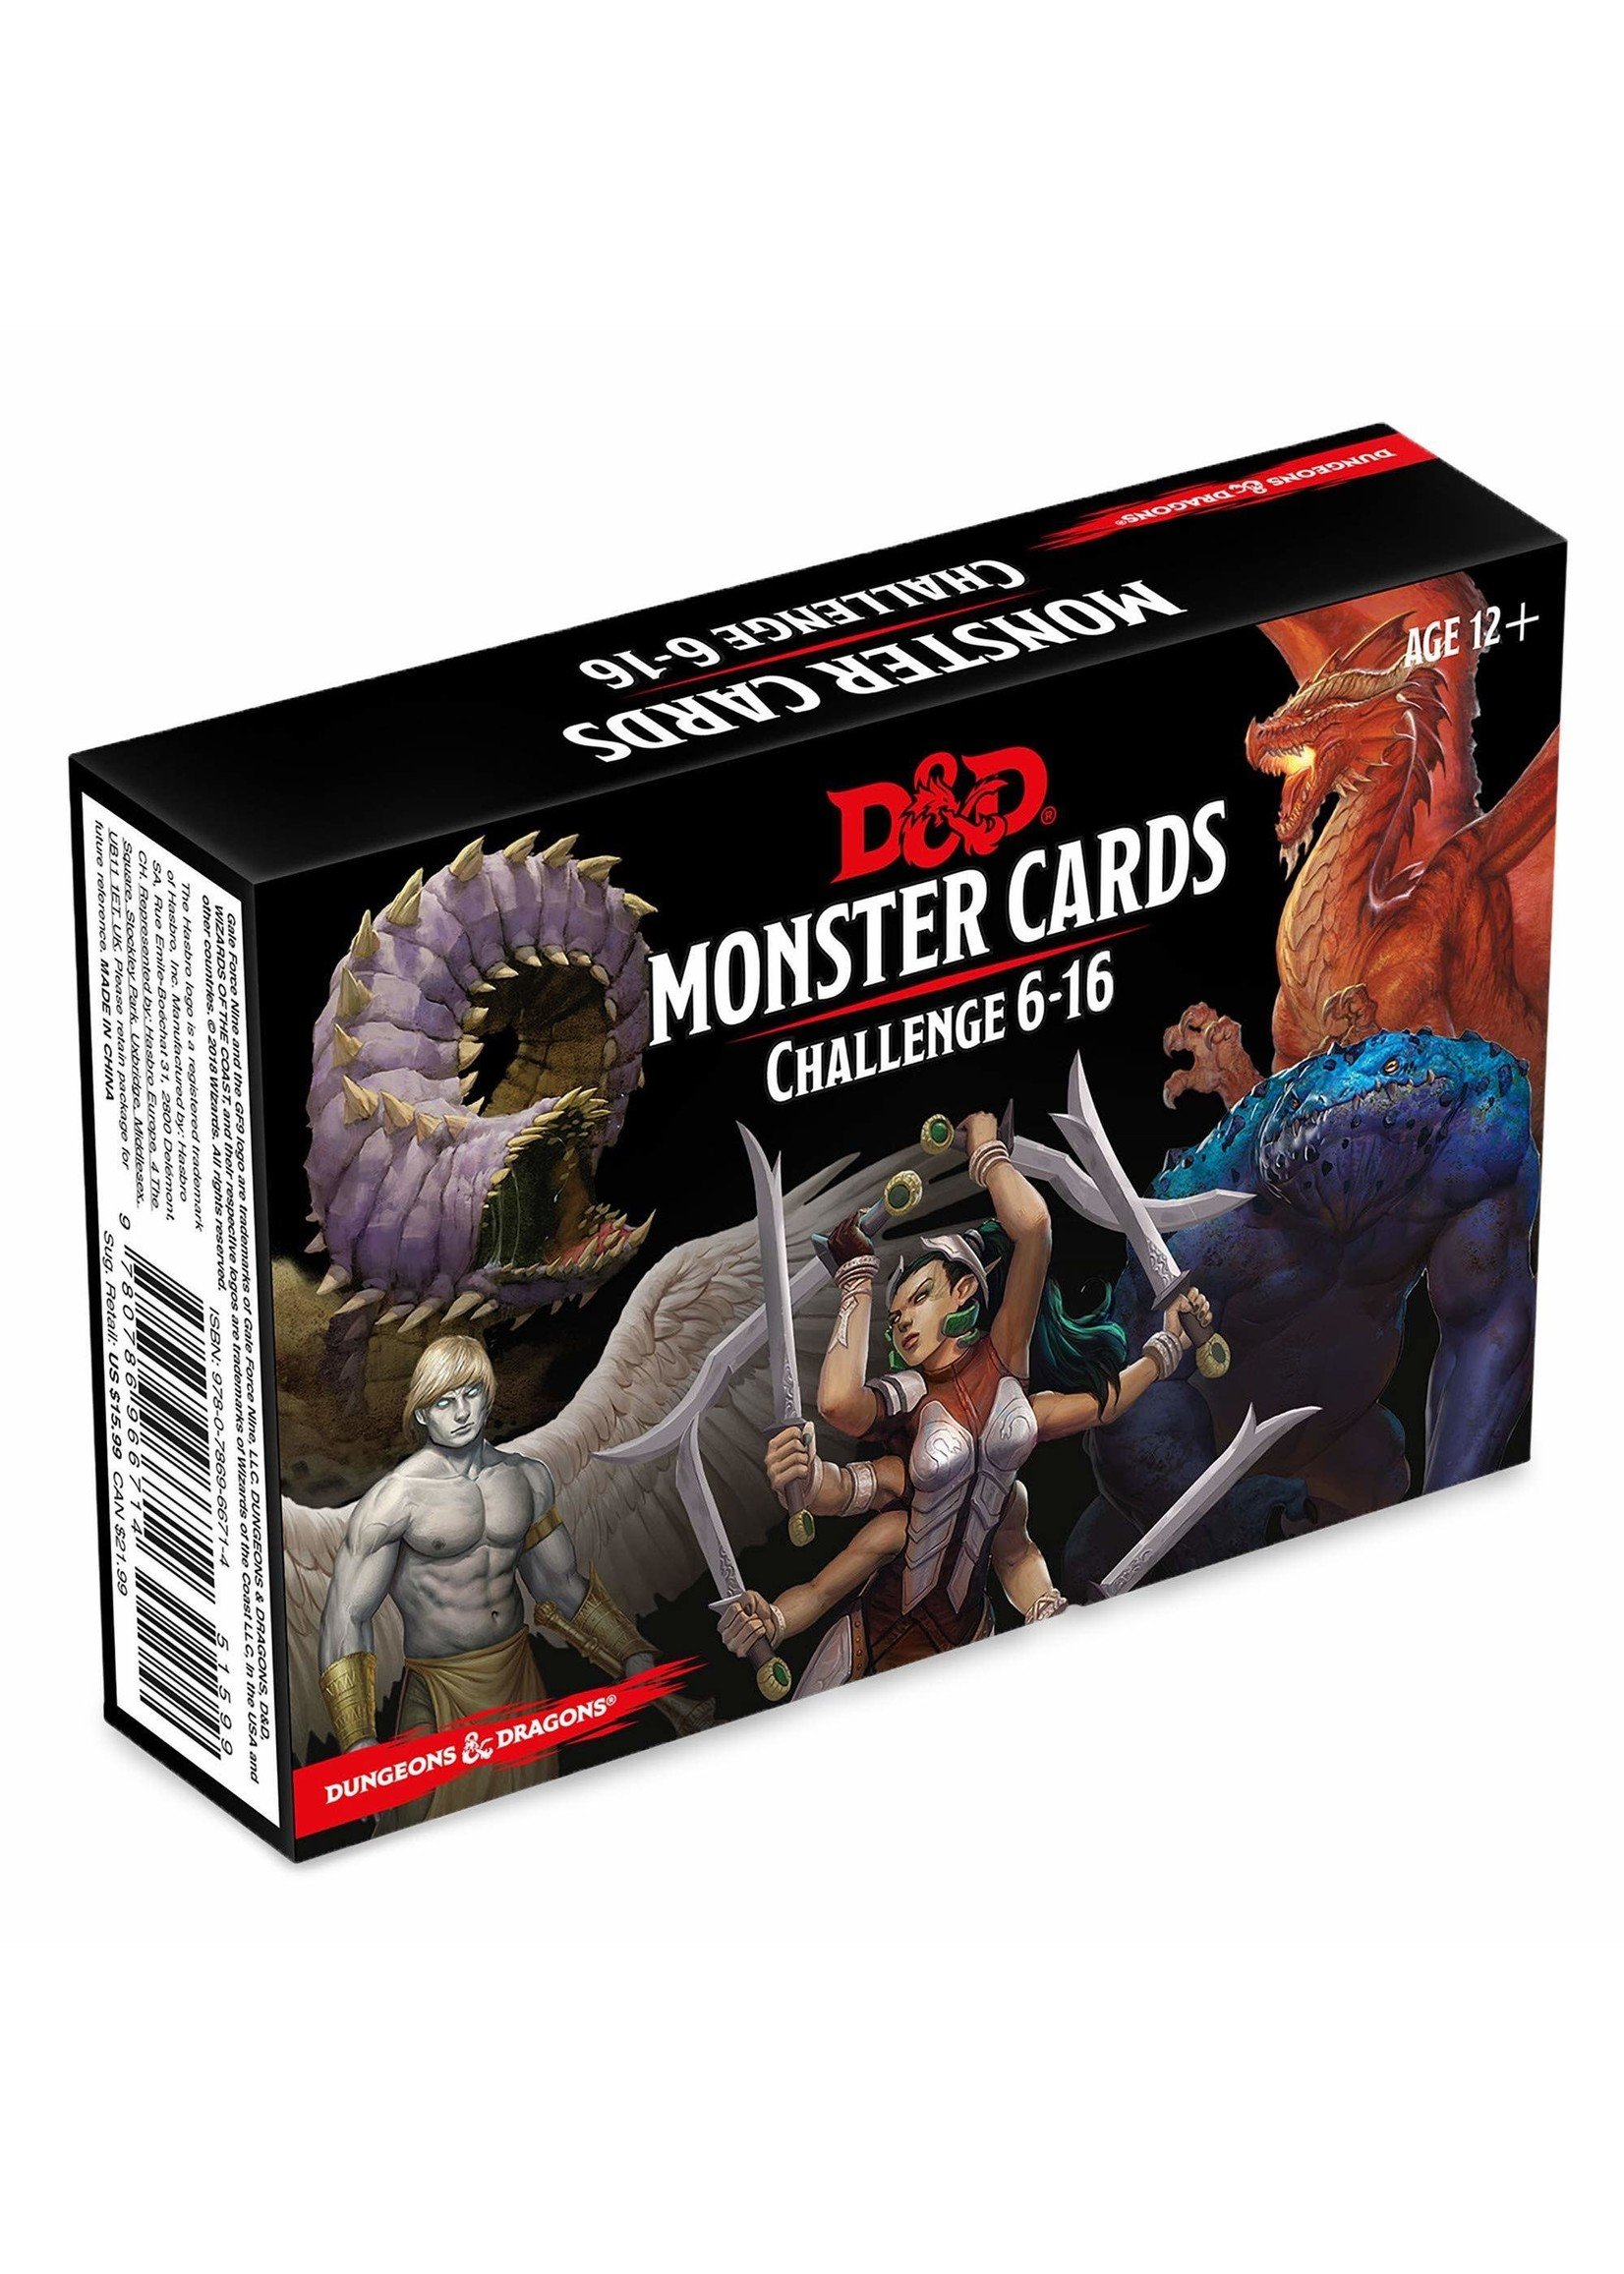 Dungeons & Dragons D&D - Monster cards - challenge 6-16